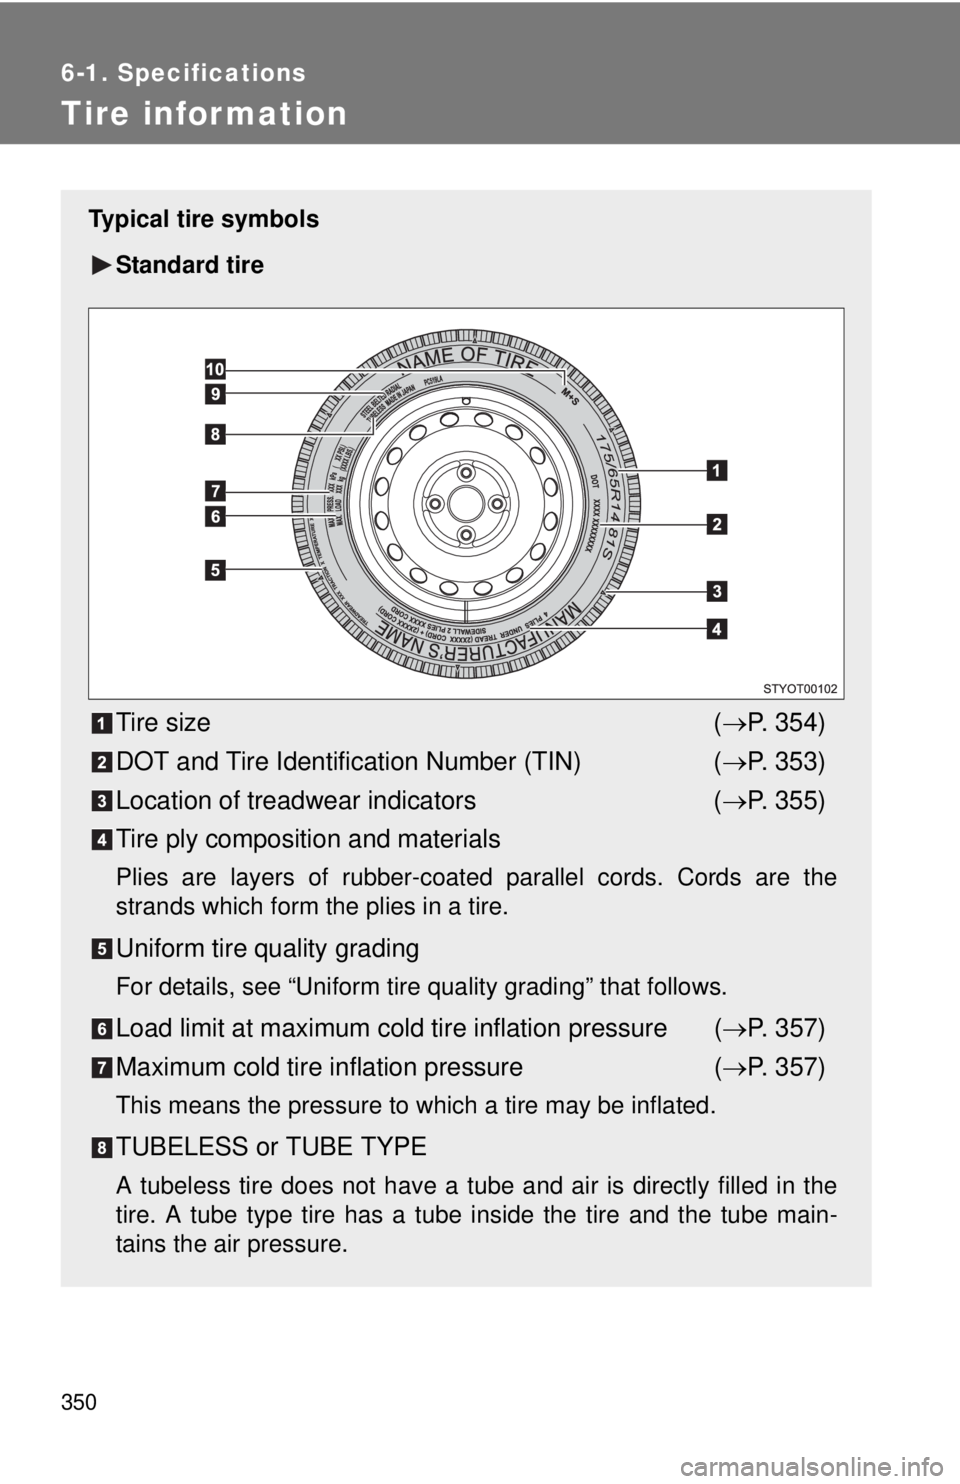 TOYOTA YARIS HATCHBACK 2008  Owners Manual 350
6-1. Specifications
Tire information
Typical tire symbolsStandard tire
Tire size (→ P. 354)
DOT and Tire Identification Number (TIN) (→ P. 353)
Location of treadwear indicators (→ P. 355)
Ti